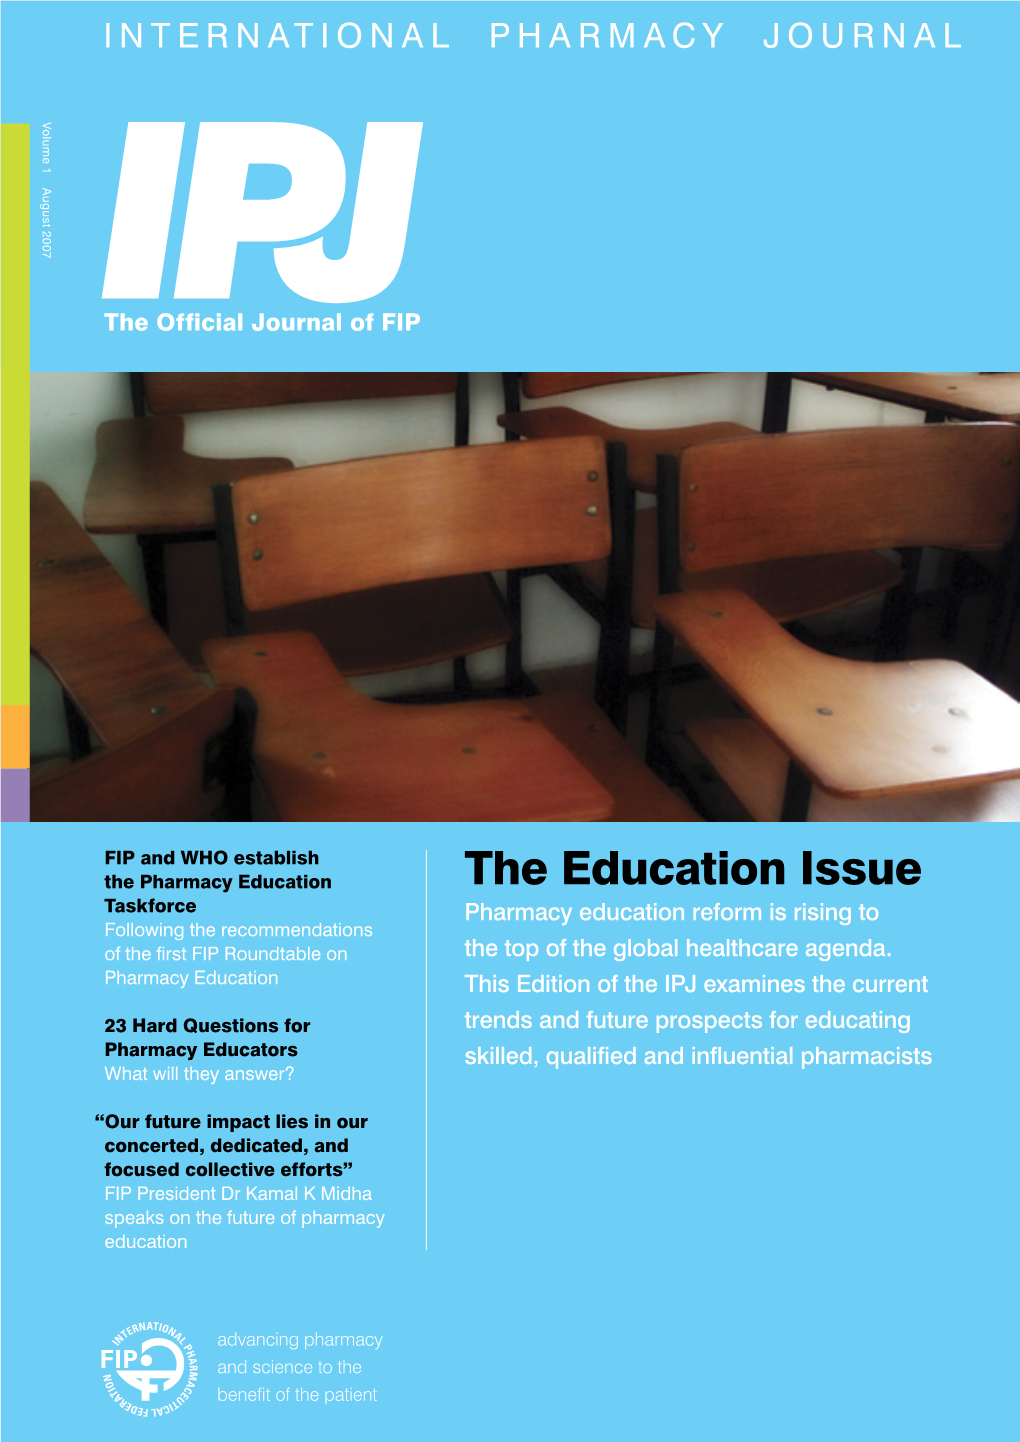 The Education Issue